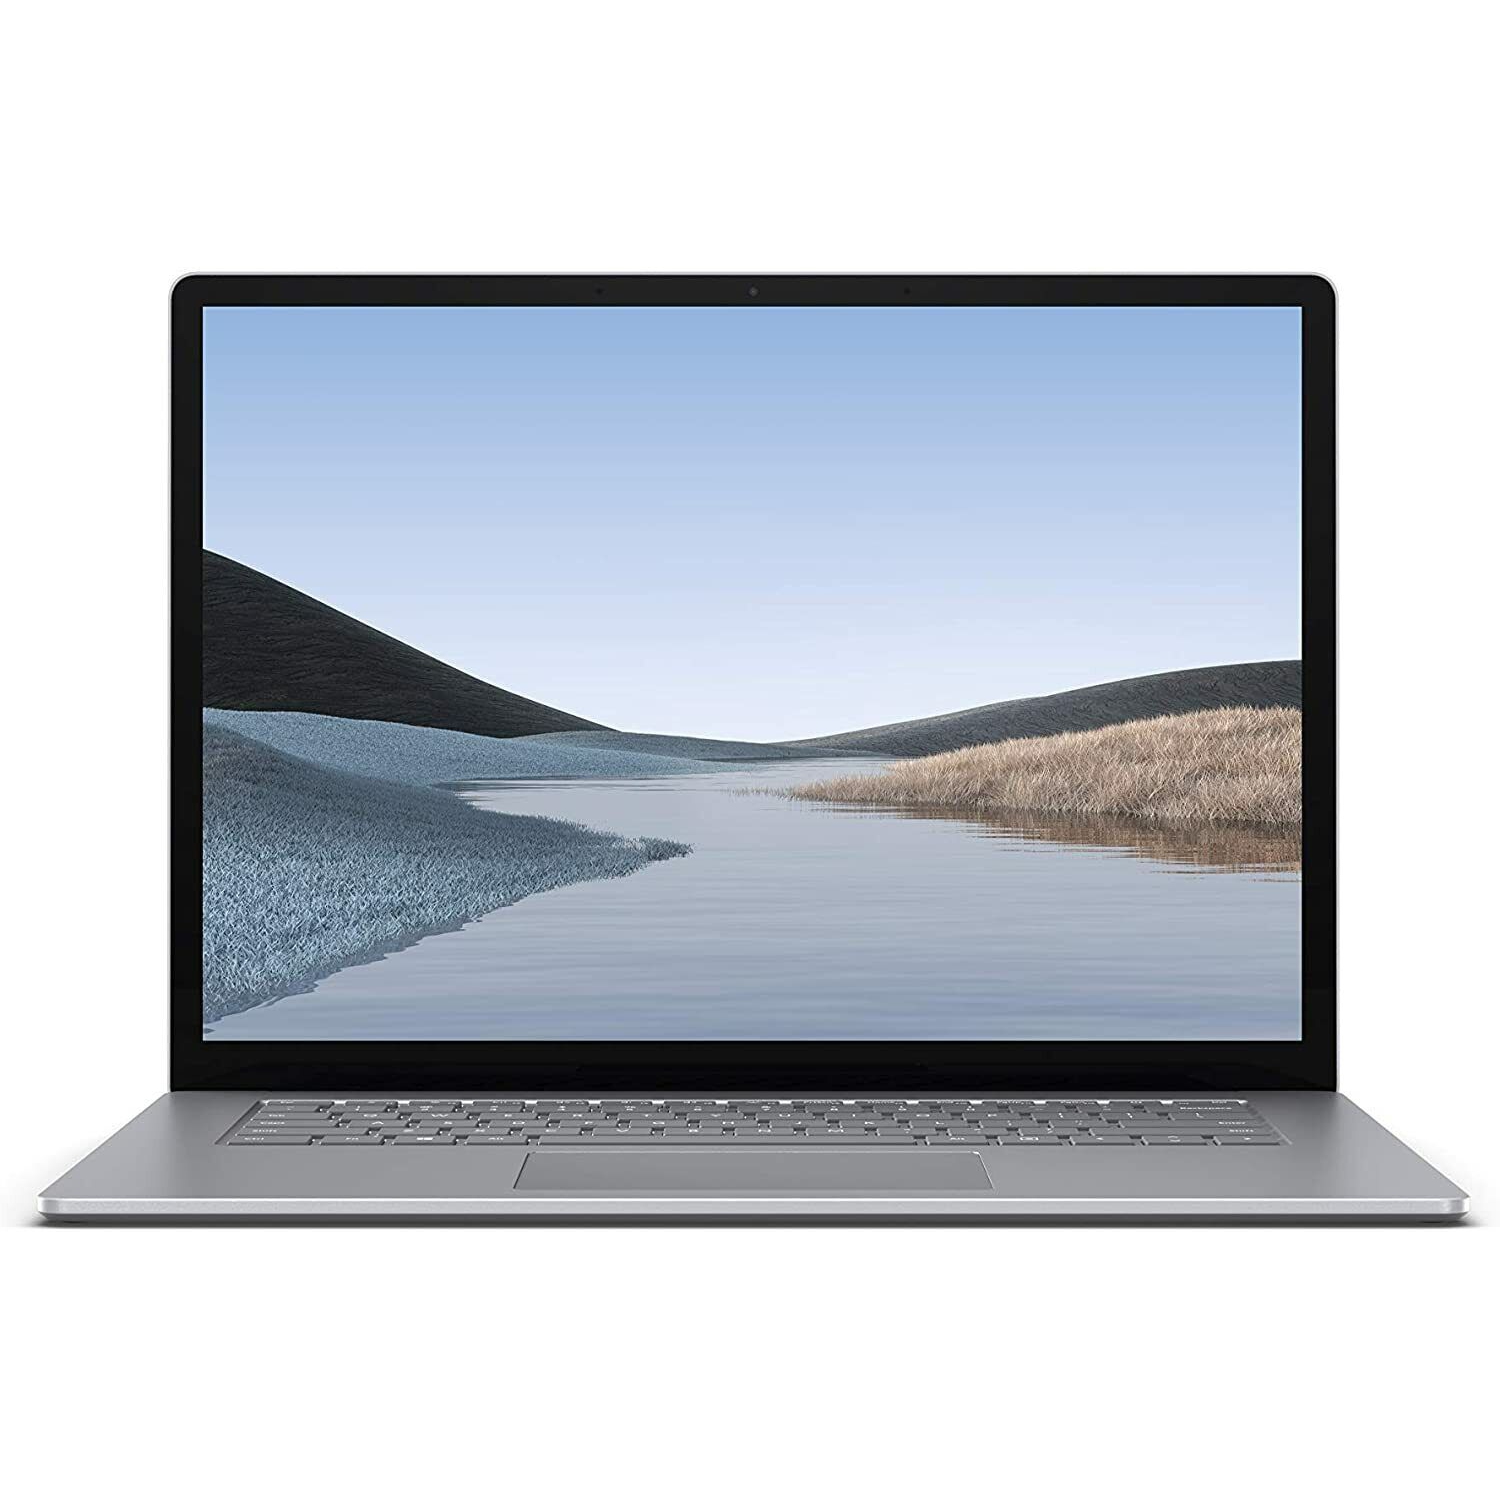 Refurbished (Excellent) - Microsoft Surface Laptop 3 15" Touch AMD Ryzen7 16GB 512GB Certified Refurbished